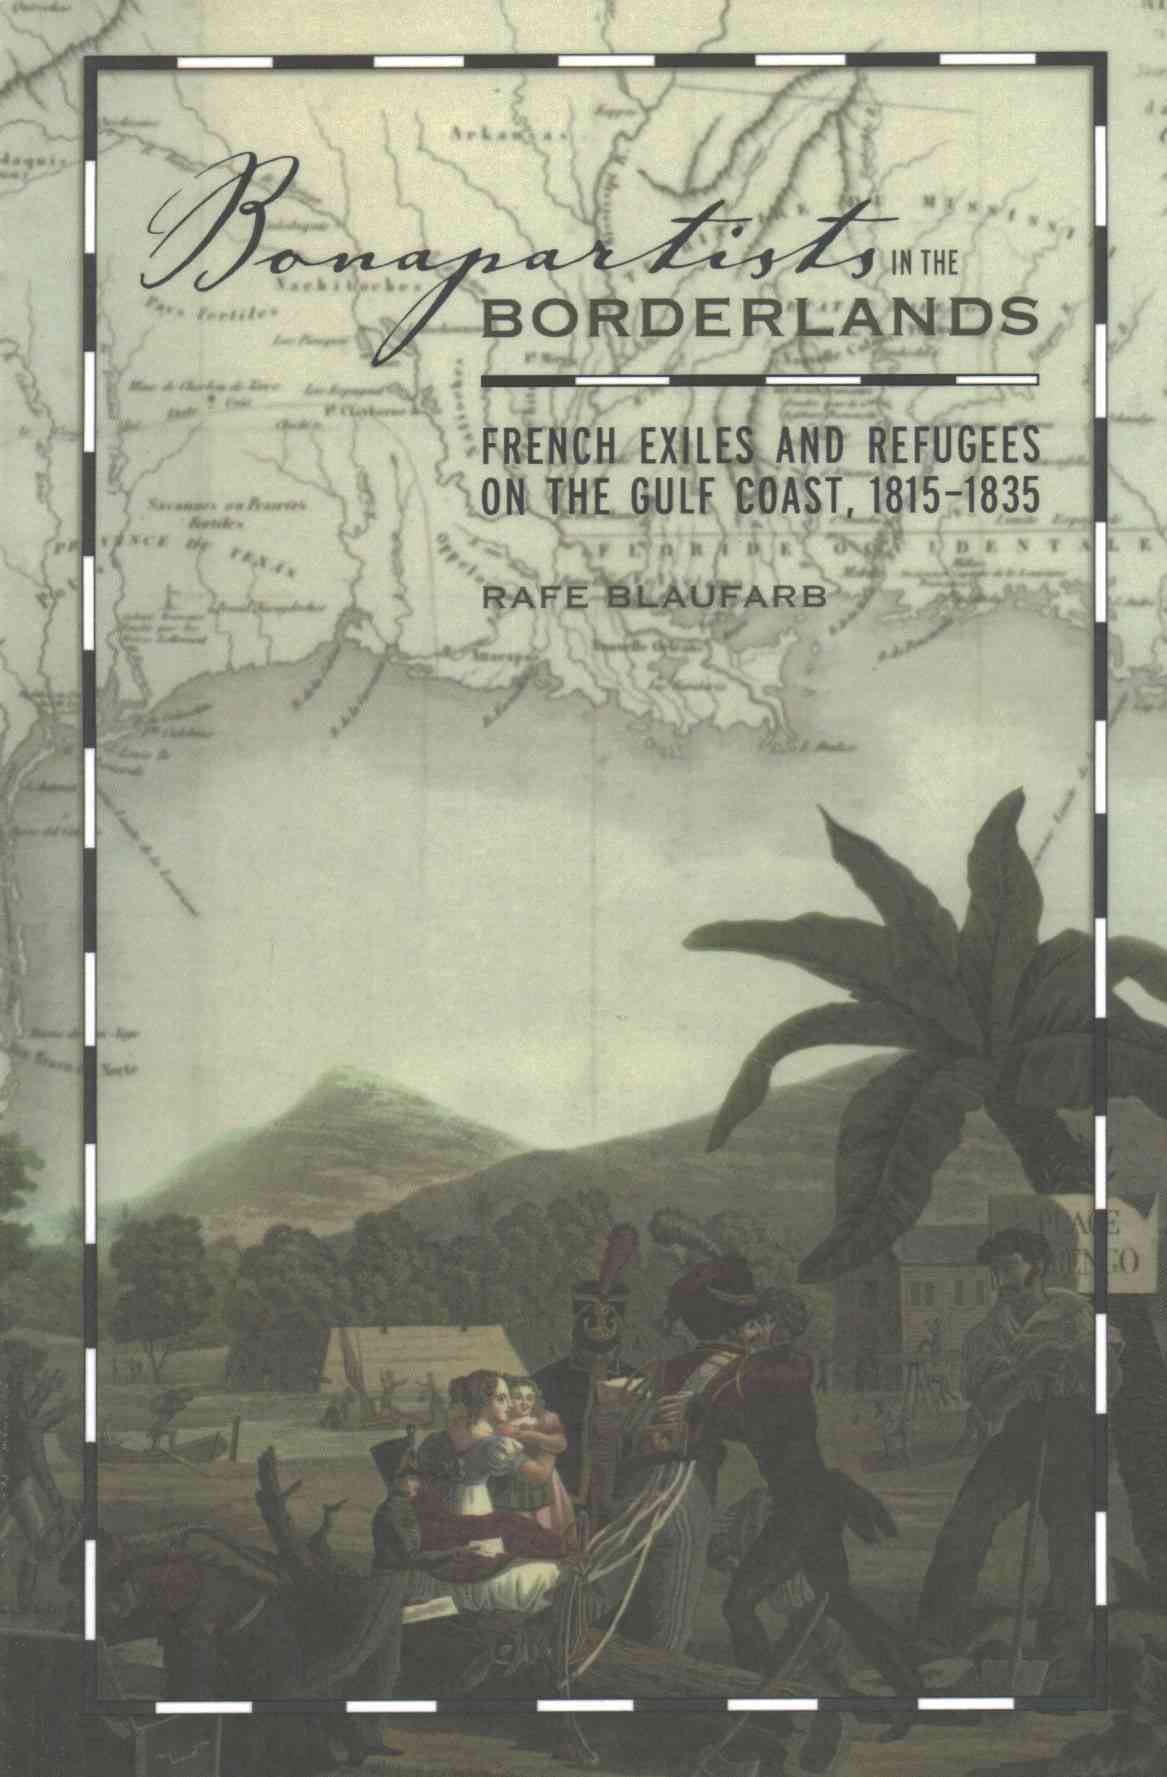 Kniha Bonapartists in the Borderlands: French Exiles and Refugees on the Gulf Coast, 1815-1835 Rafe Blaufarb